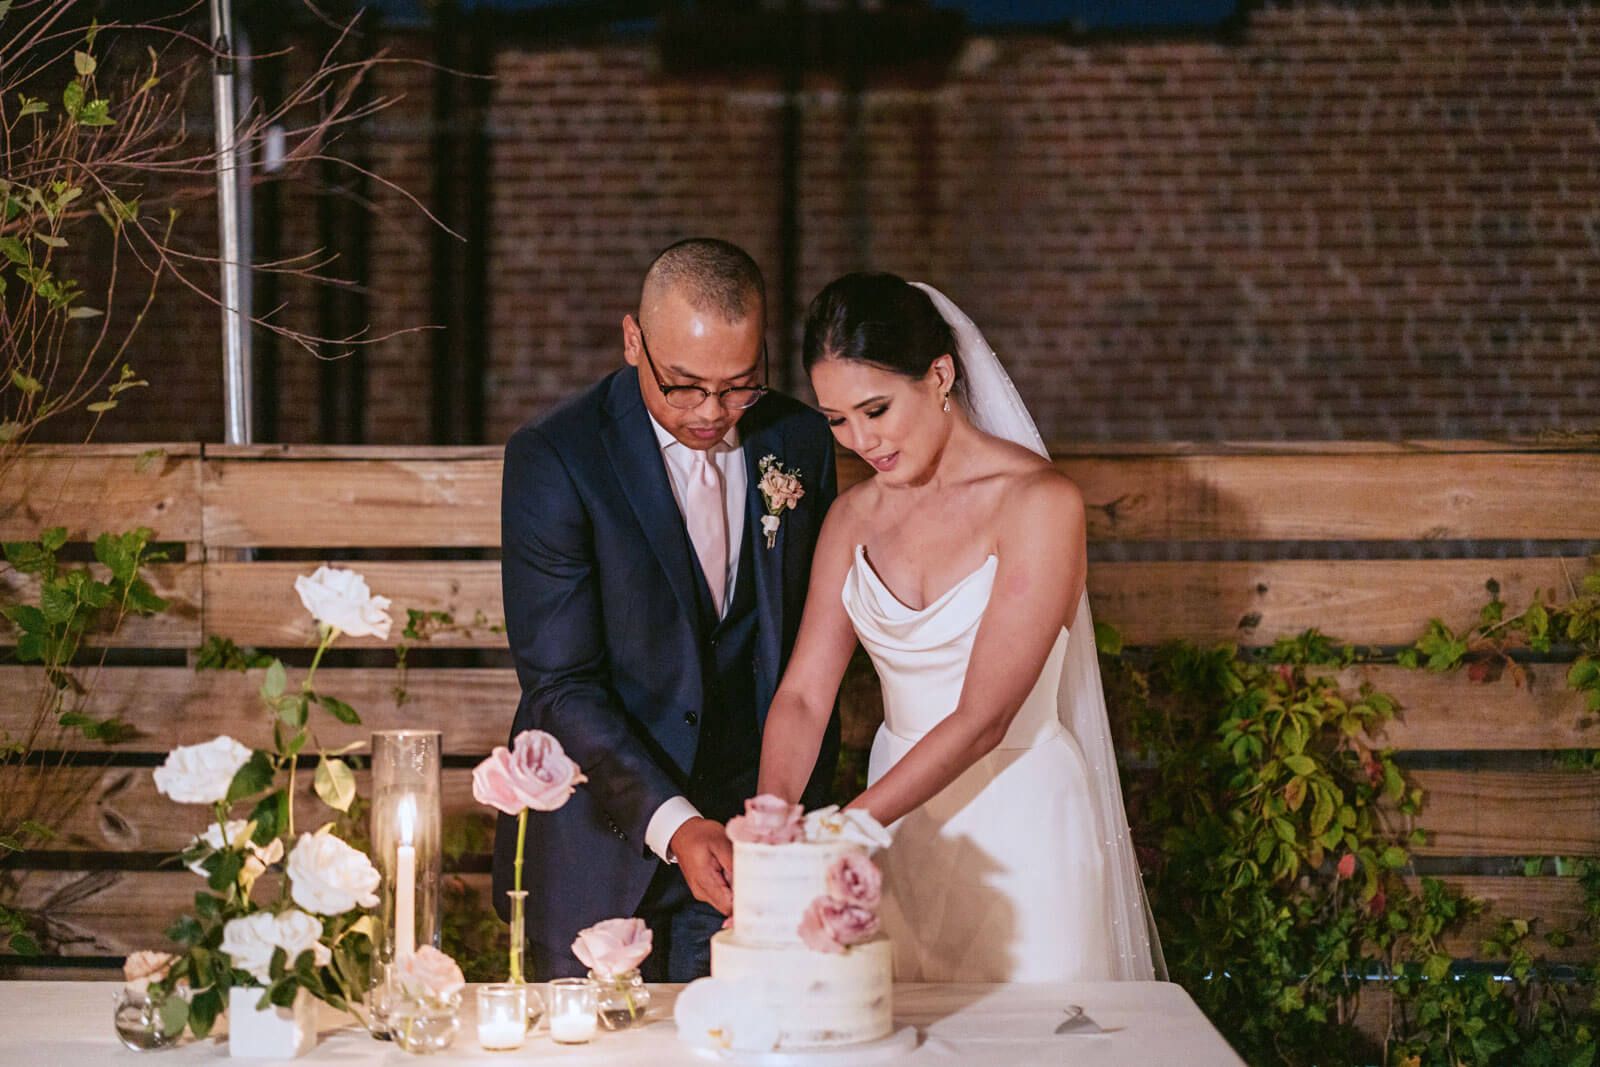 The newlyweds are cutting a slice of their small cake in a New York City elopement. Image  by Jenny Fu Studio